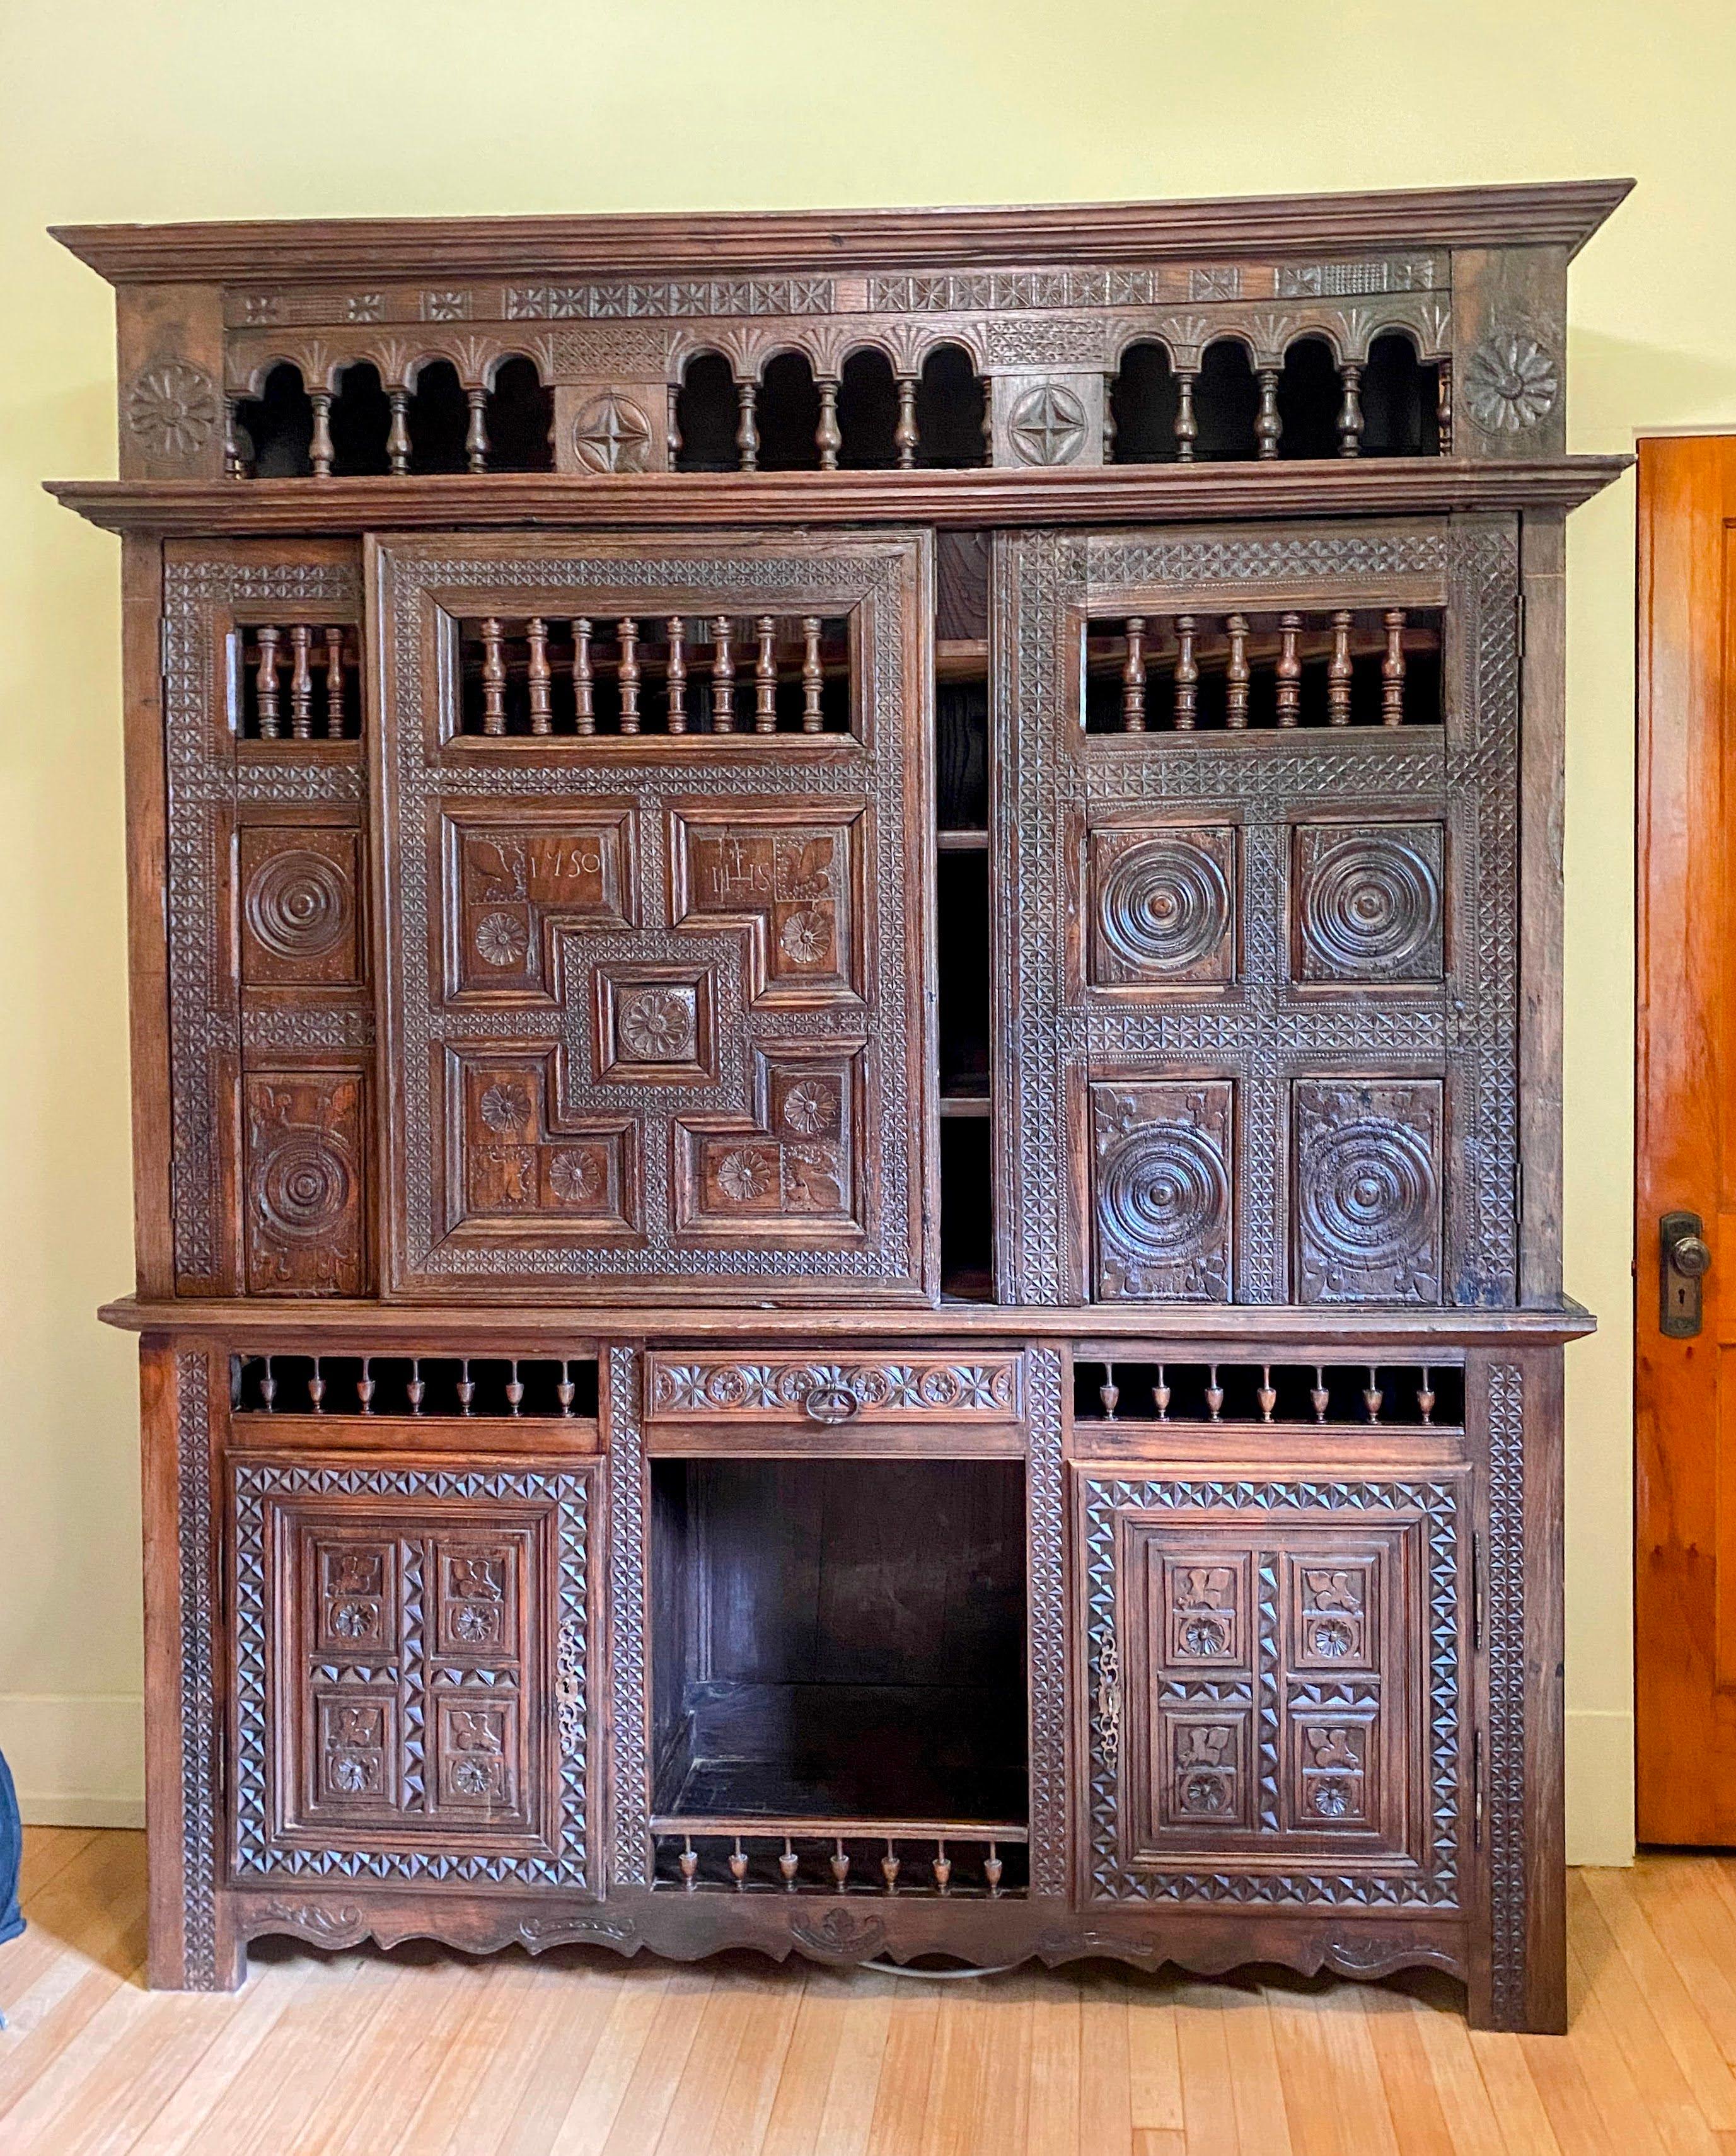 Antique French Black Stained Oak Lit Clos Cabinet, 18th C. This piece makes a stunning bookcase and storage cabinet. This intricately carved and detailed piece originated in Brittany, C 1750. (upper portion). The date 1750 is carved in one panel